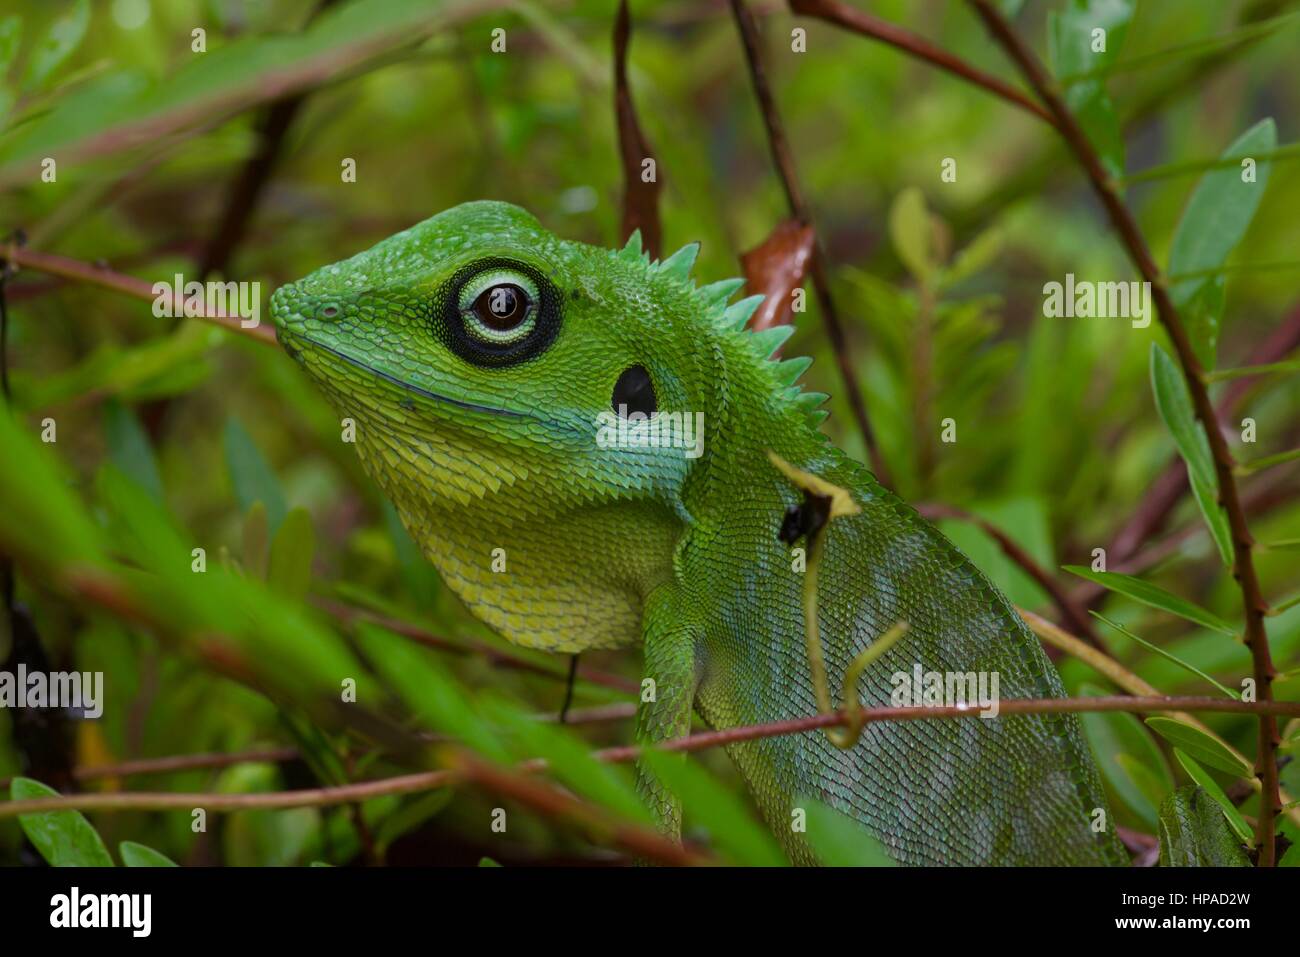 Close-up of a Green Crested Lizard (Bronchocela cristatella) in vegetation in Kubah National Park, Sarawak, Malaysia Stock Photo